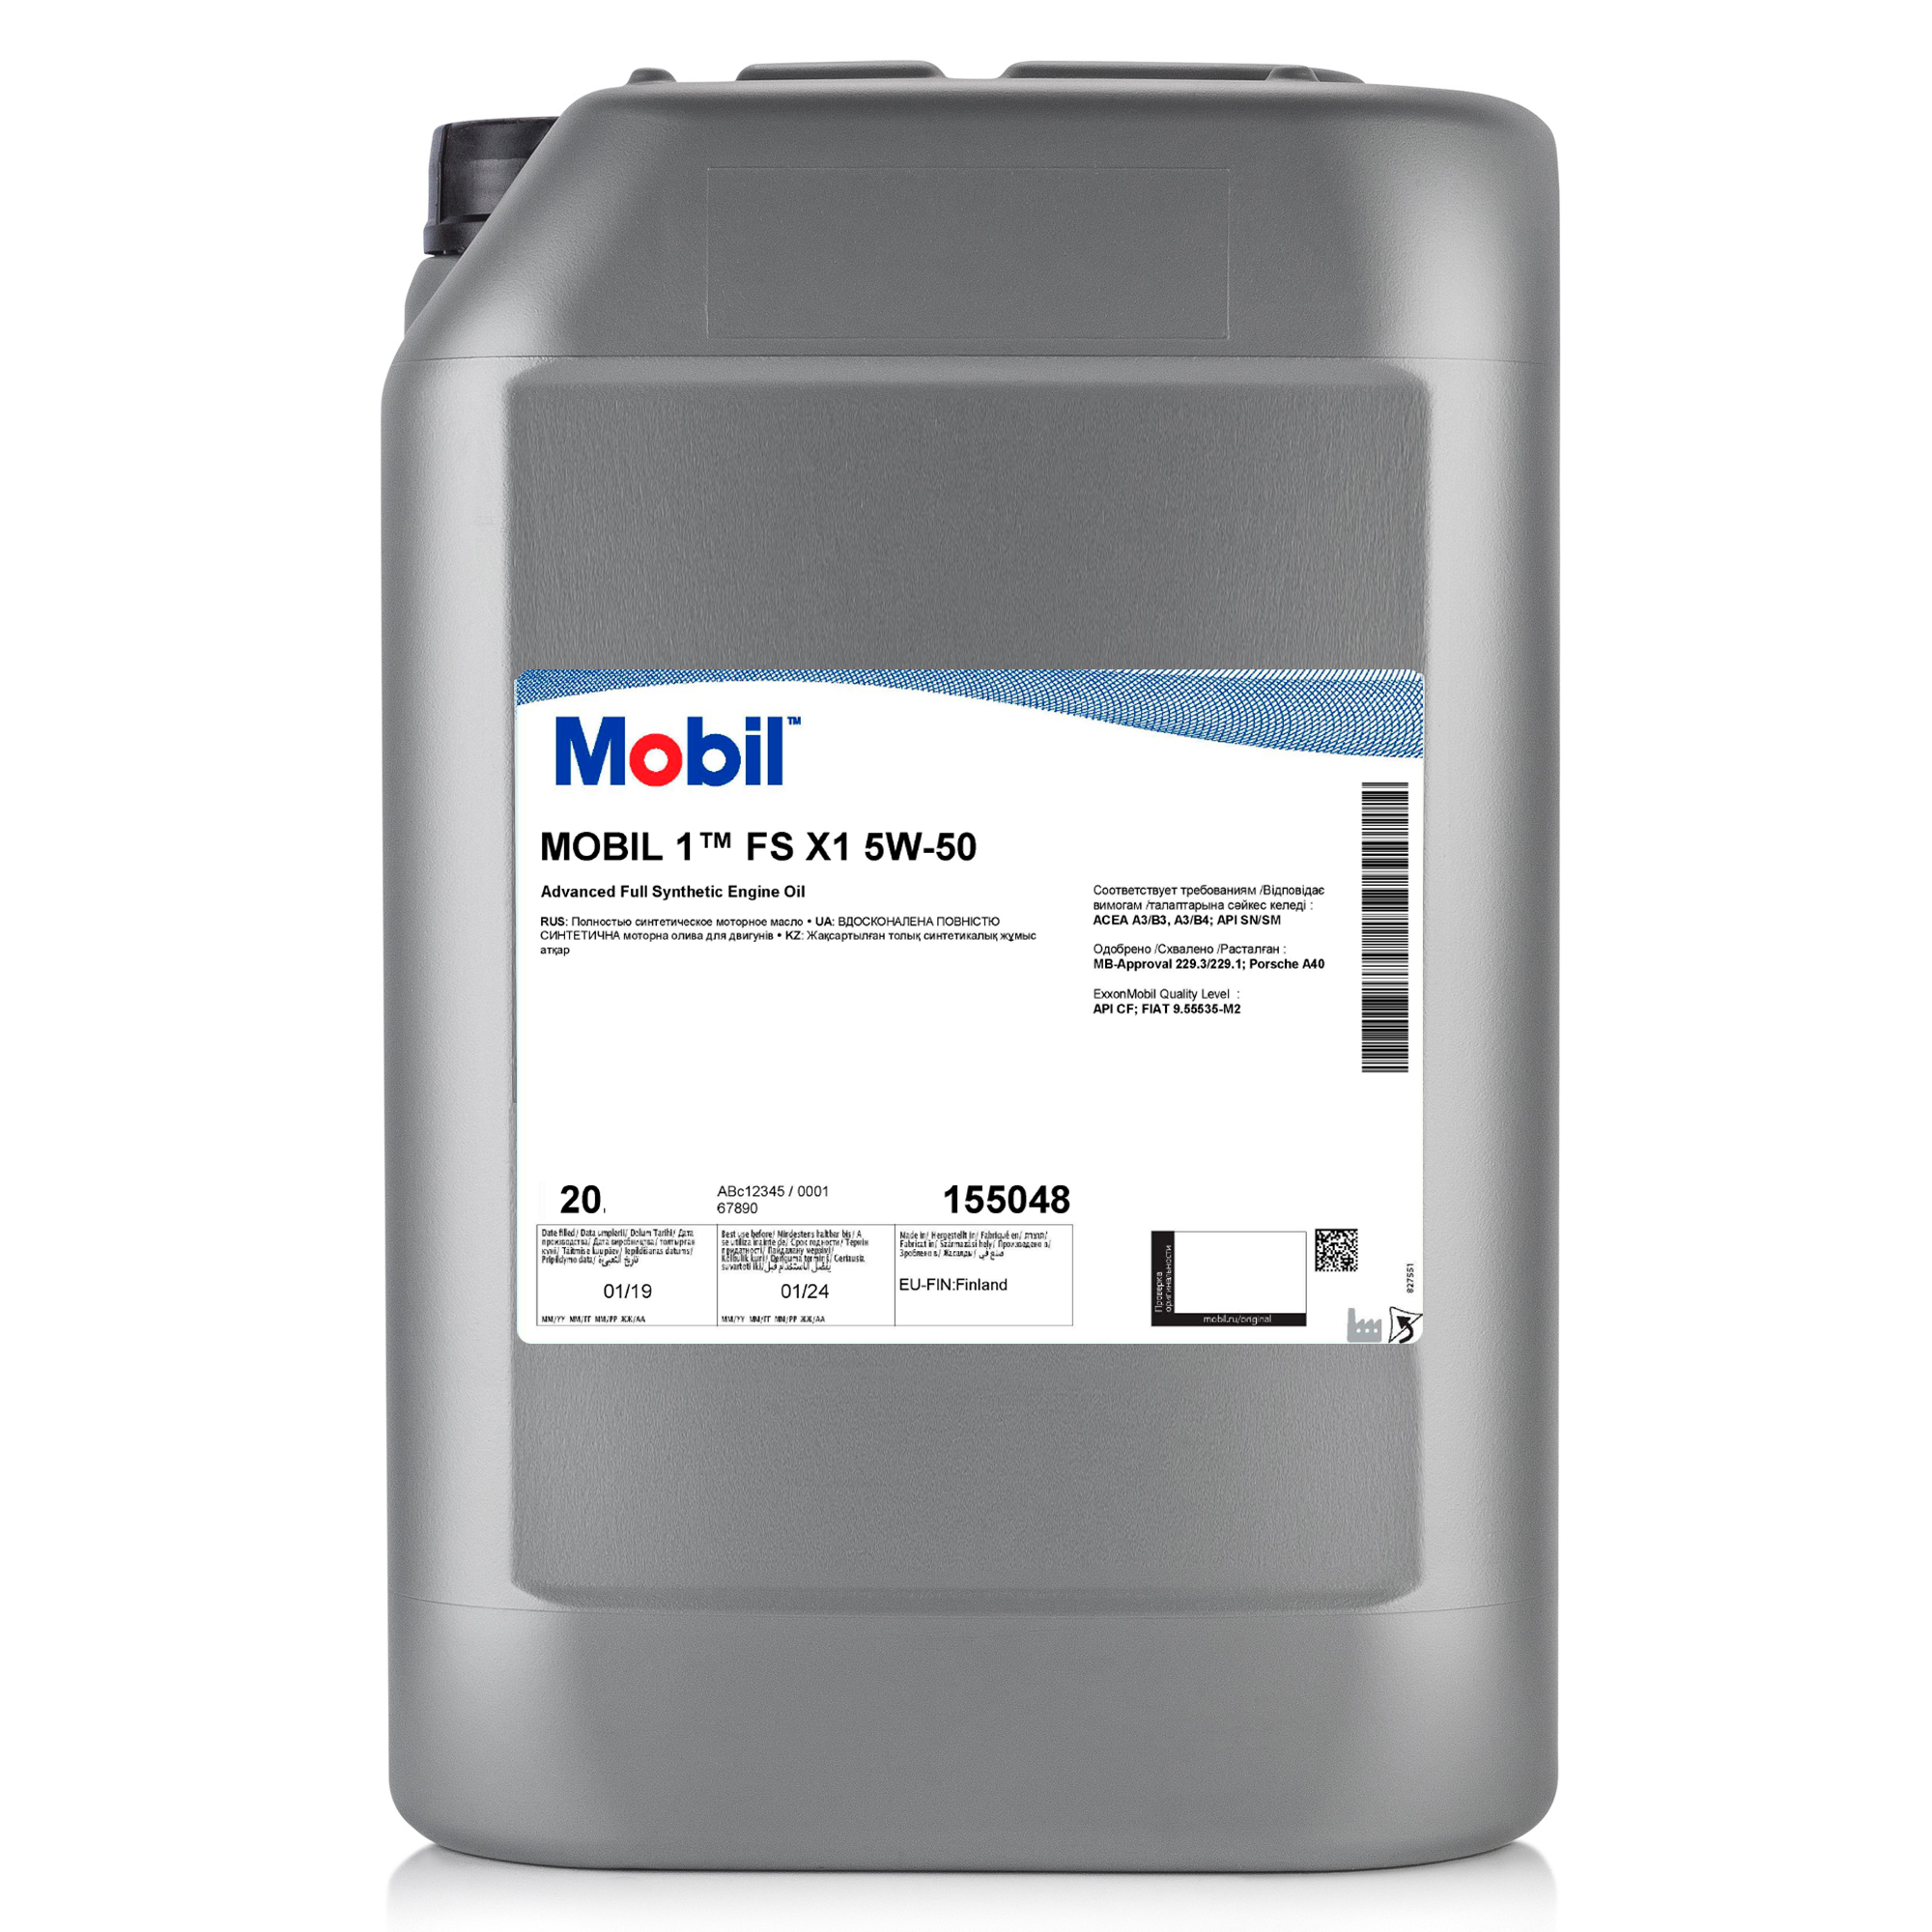 Mobil ESP 5w30. Mobil 1 ESP 5w-30 (20 л.). 154303 Mobil 1 ESP 5w-30. Mobil 1 ESP 5w-30. Масло mobil 20л